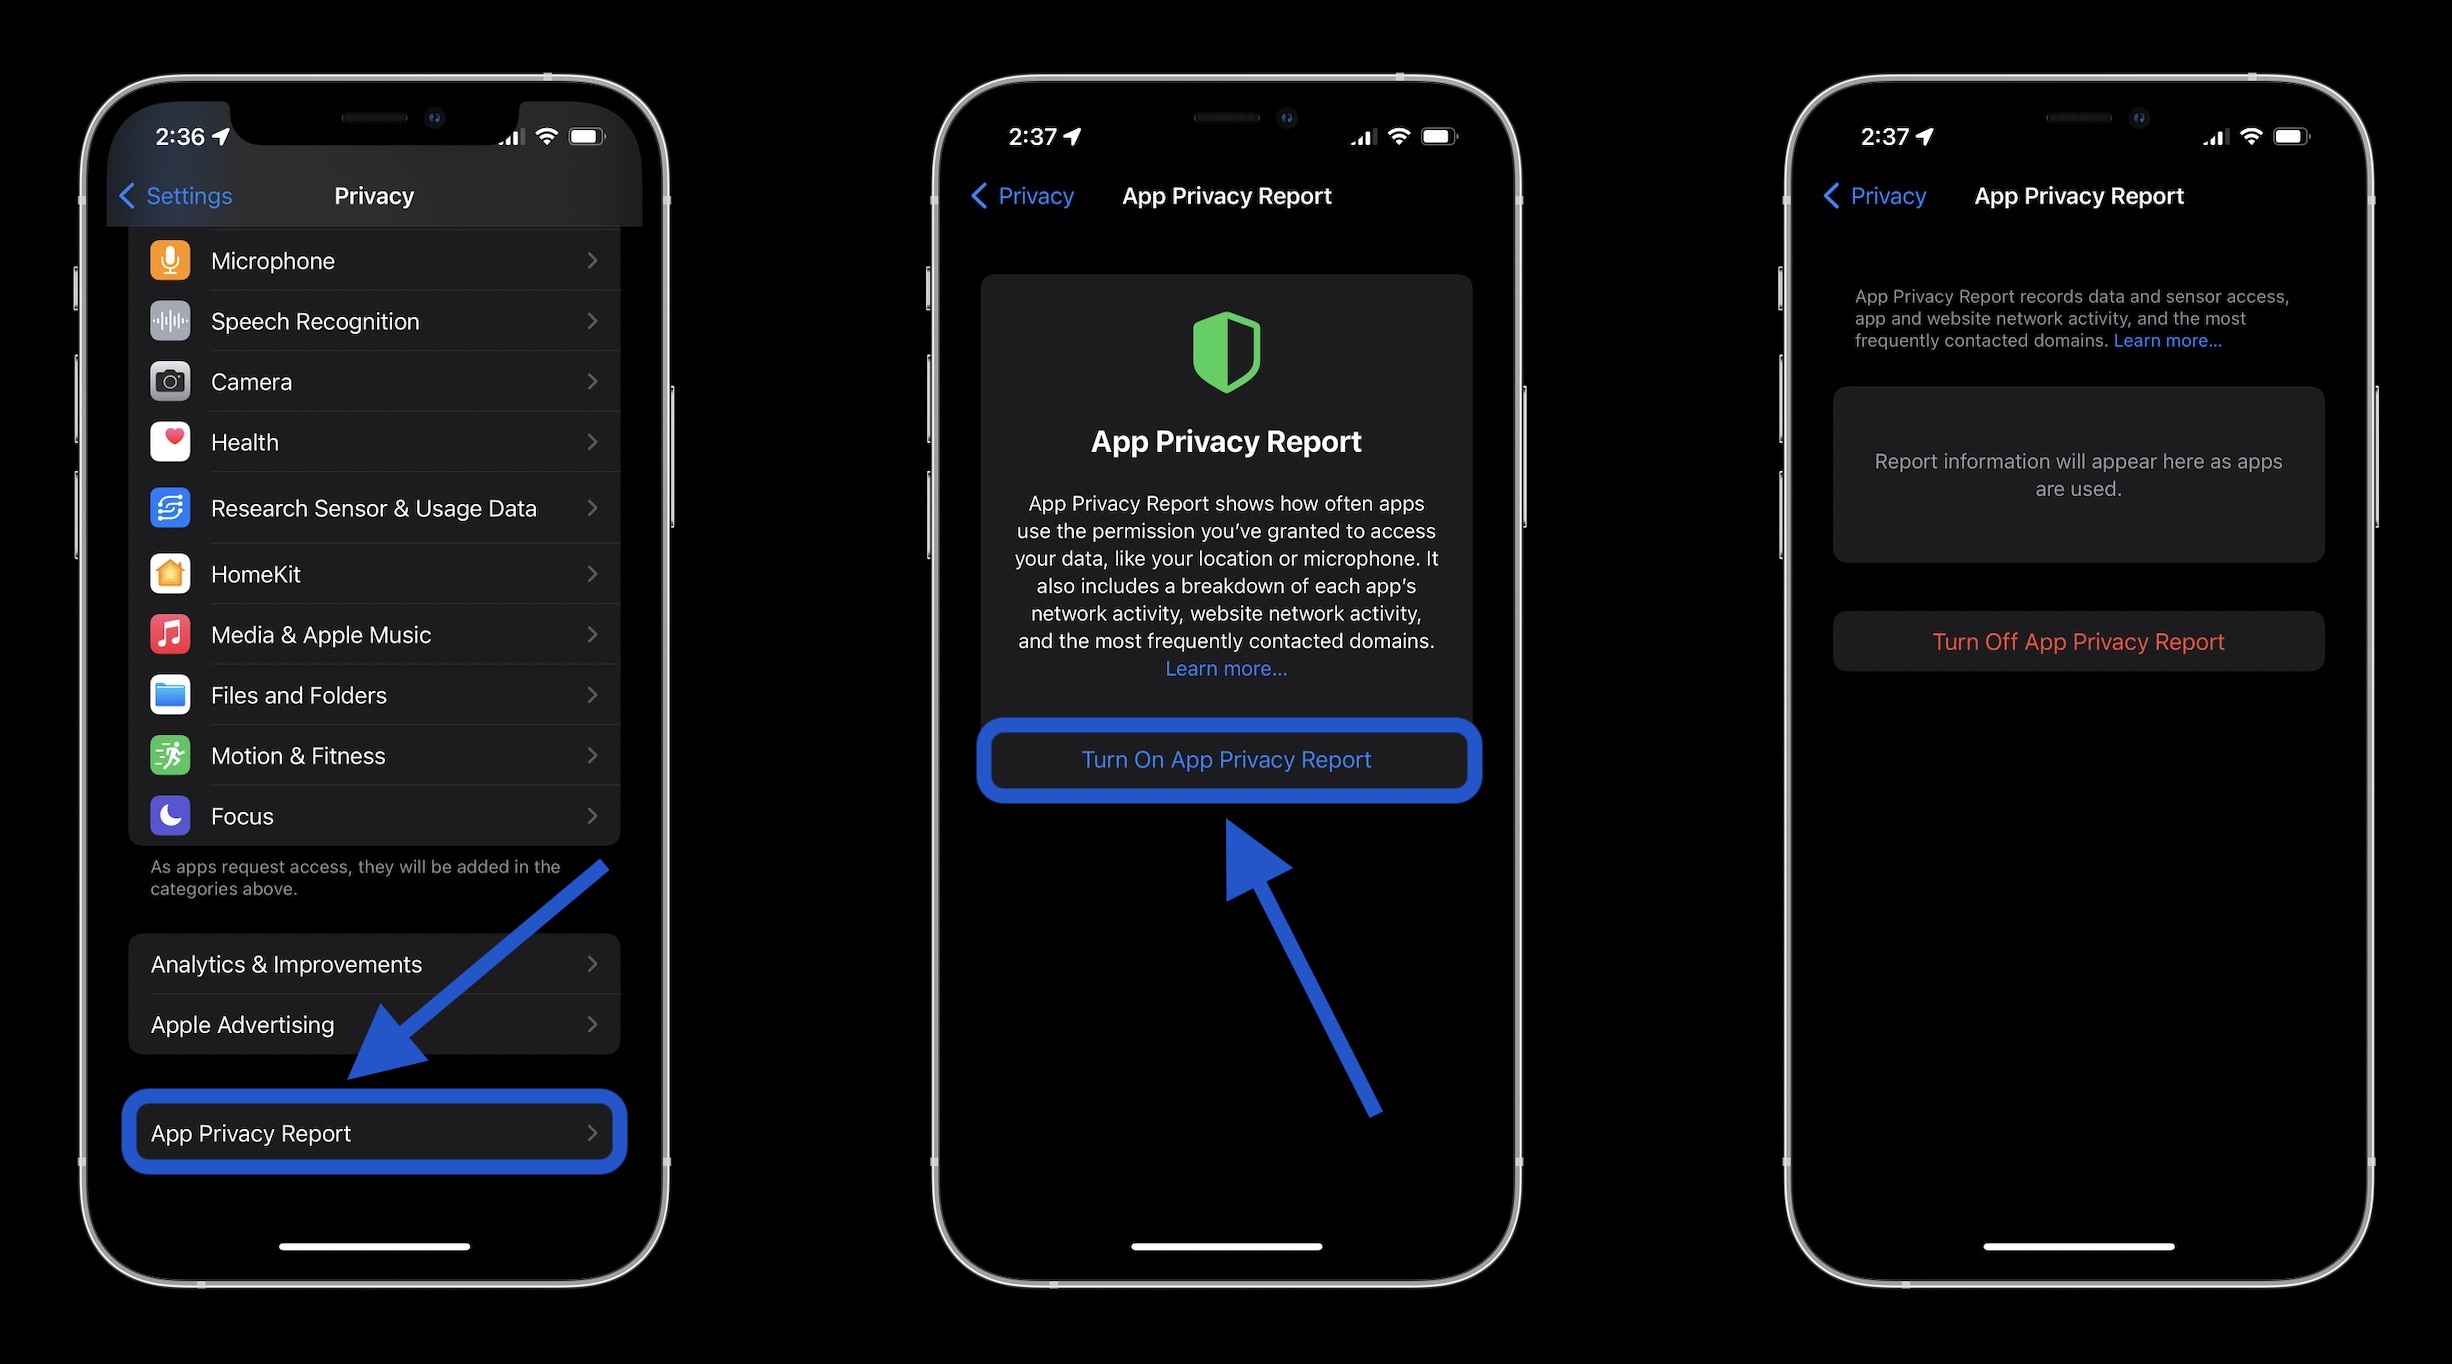 How to turn on iPhone App Privacy Report - Settings > Privateness > App Privateness Report – ON” class=”wp-image-775699″ srcset=”https://9to5mac.com/wp-content/uploads/websites/6/2021/12/how-to-turn-on-iphone-app-privacy-report-walkthrough-2.jpg 2452w, https://9to5mac .com/wp-content/uploads/websites/6/2021/12/how-to-turn-on-iphone-app-privacy-report-walkthrough-2.jpg?resize=155,86 155w, https:// 9to5mac.com/wp-content/uploads/websites/6/2021/12/how-to-turn-on-iphone-app-privacy-report-walkthrough-2.jpg?resize=655364 655w, https://9to5mac .com/wp-content/uploads/websites/6/2021/12/how-to-turn-on-iphone-app-privacy-report-walkthrough-2.jpg?resize=768,427 768w, https://9to5mac. com/wp-content/uploads/websites/6/2021/12/how-to-turn-on-iphone-app-privacy-report-walkthrough-2.jpg?resize=1024,570 1024w, https://9to5mac .com/wp-content/uploads/websites/6/2021/12/how-to-turn-on-iphone-app-privacy-report-walkthrough-2.jpg?resize=1536,854 1536w, https:// 9to5mac.com/wp-content/uploads/websites/6/2021/12/how-to-turn-on-iphone-app-privacy-report-walkthrough-2.jpg?resize=2048,1139 2048w, https:// /9to5mac.com/wp-content/uploads/websites/6/2021/12/how-to-t  urn-on-iphone-app-privacy-report-walkthrough-2.jpg?resize=350195 350w, https://9to5mac.com/wp-content/uploads/websites/6/2021/12/how-to-turn -on-iphone-app-privacy-report-walkthrough-2.jpg?resize=1600,890 1600w, https://9to5mac.com/wp-content/uploads/websites/6/2021/12/how-to- turn-on-iphone-app-privacy-report-walkthrough-2.jpg?resize=150,83 150w” sizes=”(max-width: 2452px) 100vw, 2452px”,</figure>
<p>After you have turned on App Privateness Stories and used your iPhone for some time, you possibly can return to the identical place to view your studies.  It can seem like this:</p>
<figure class=